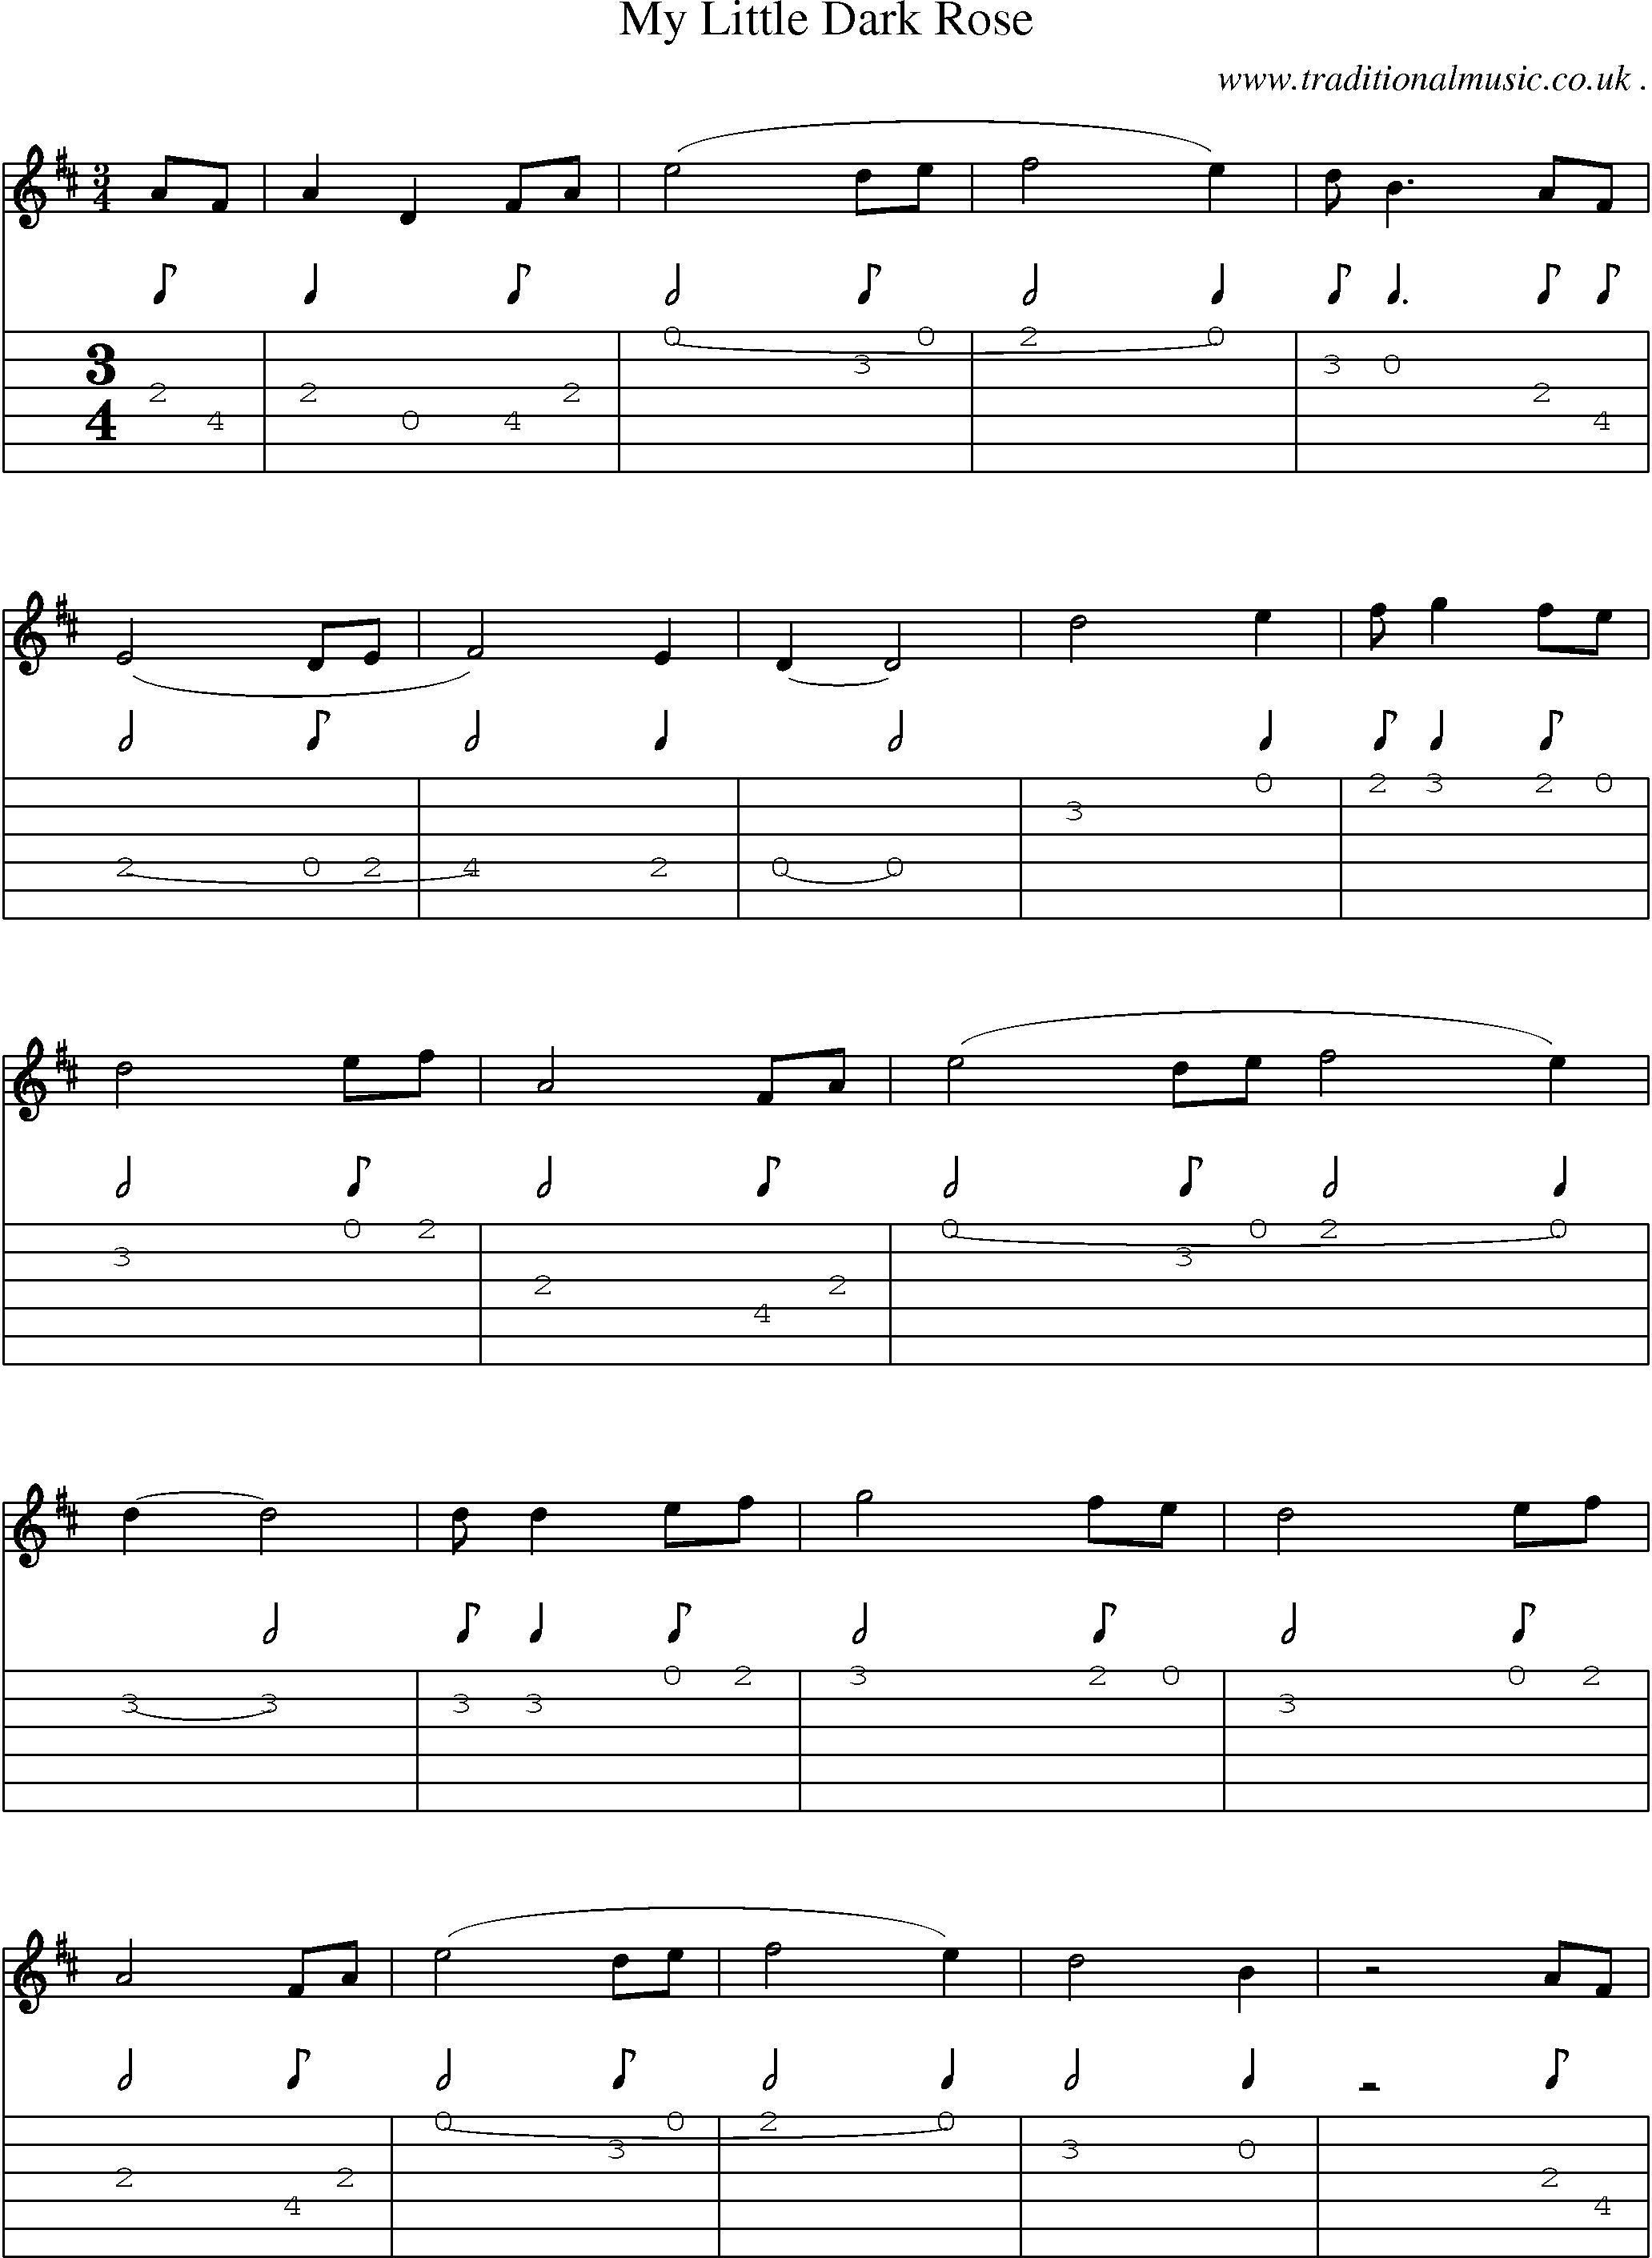 Sheet-Music and Guitar Tabs for My Little Dark Rose